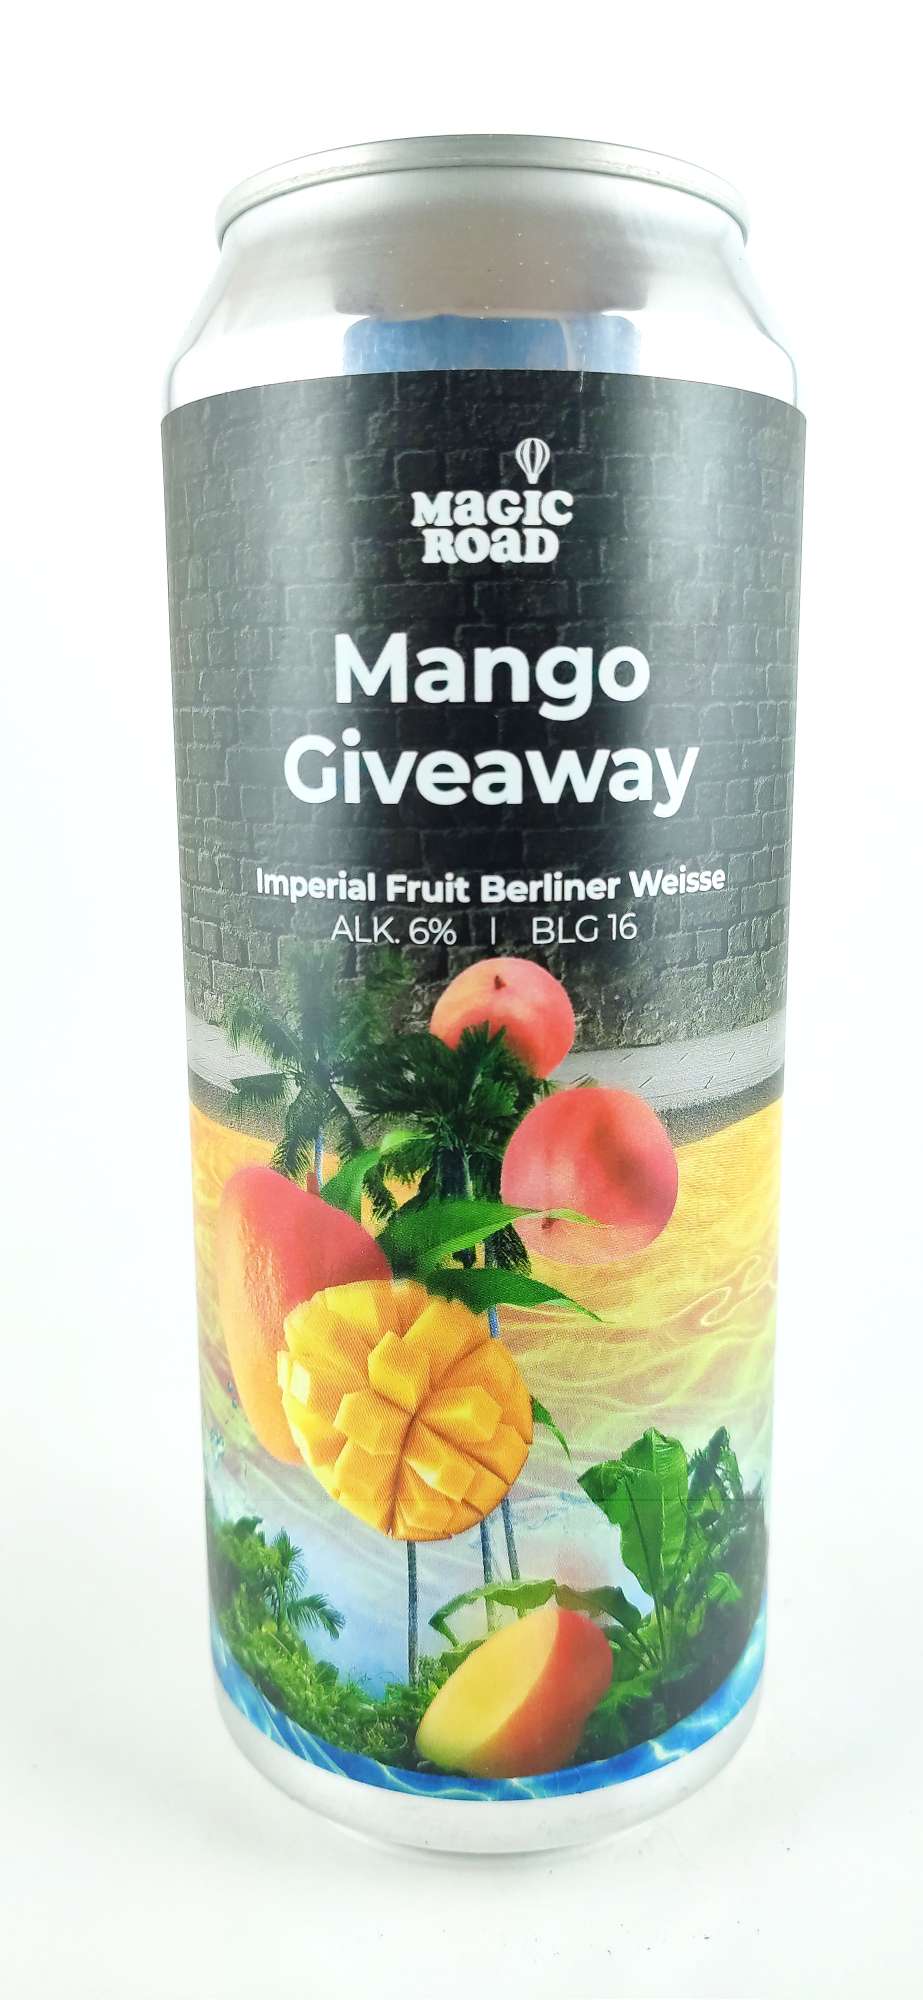 Magic Road Mango GiveAway Sour Fruited Imperial Berliner Weisse 16°